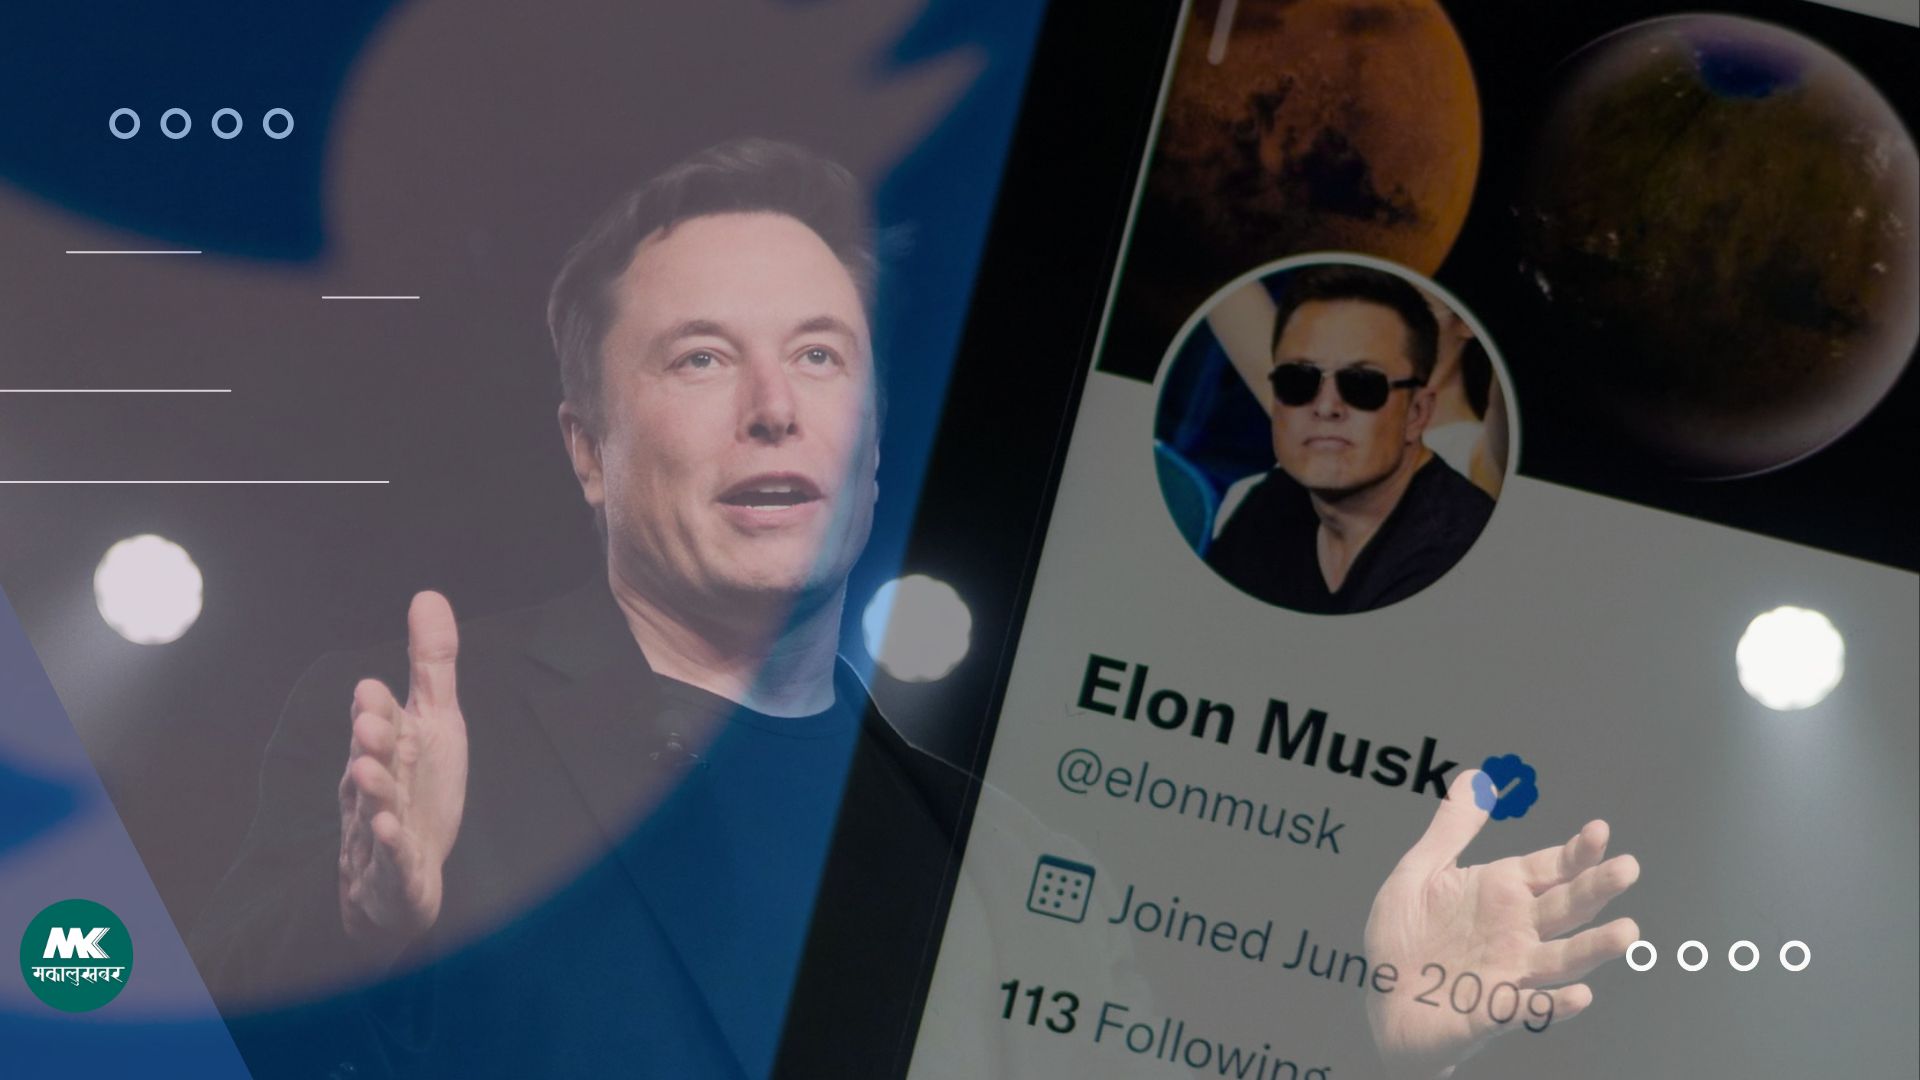 Elon Musk: How the world’s richest person bought Twitter